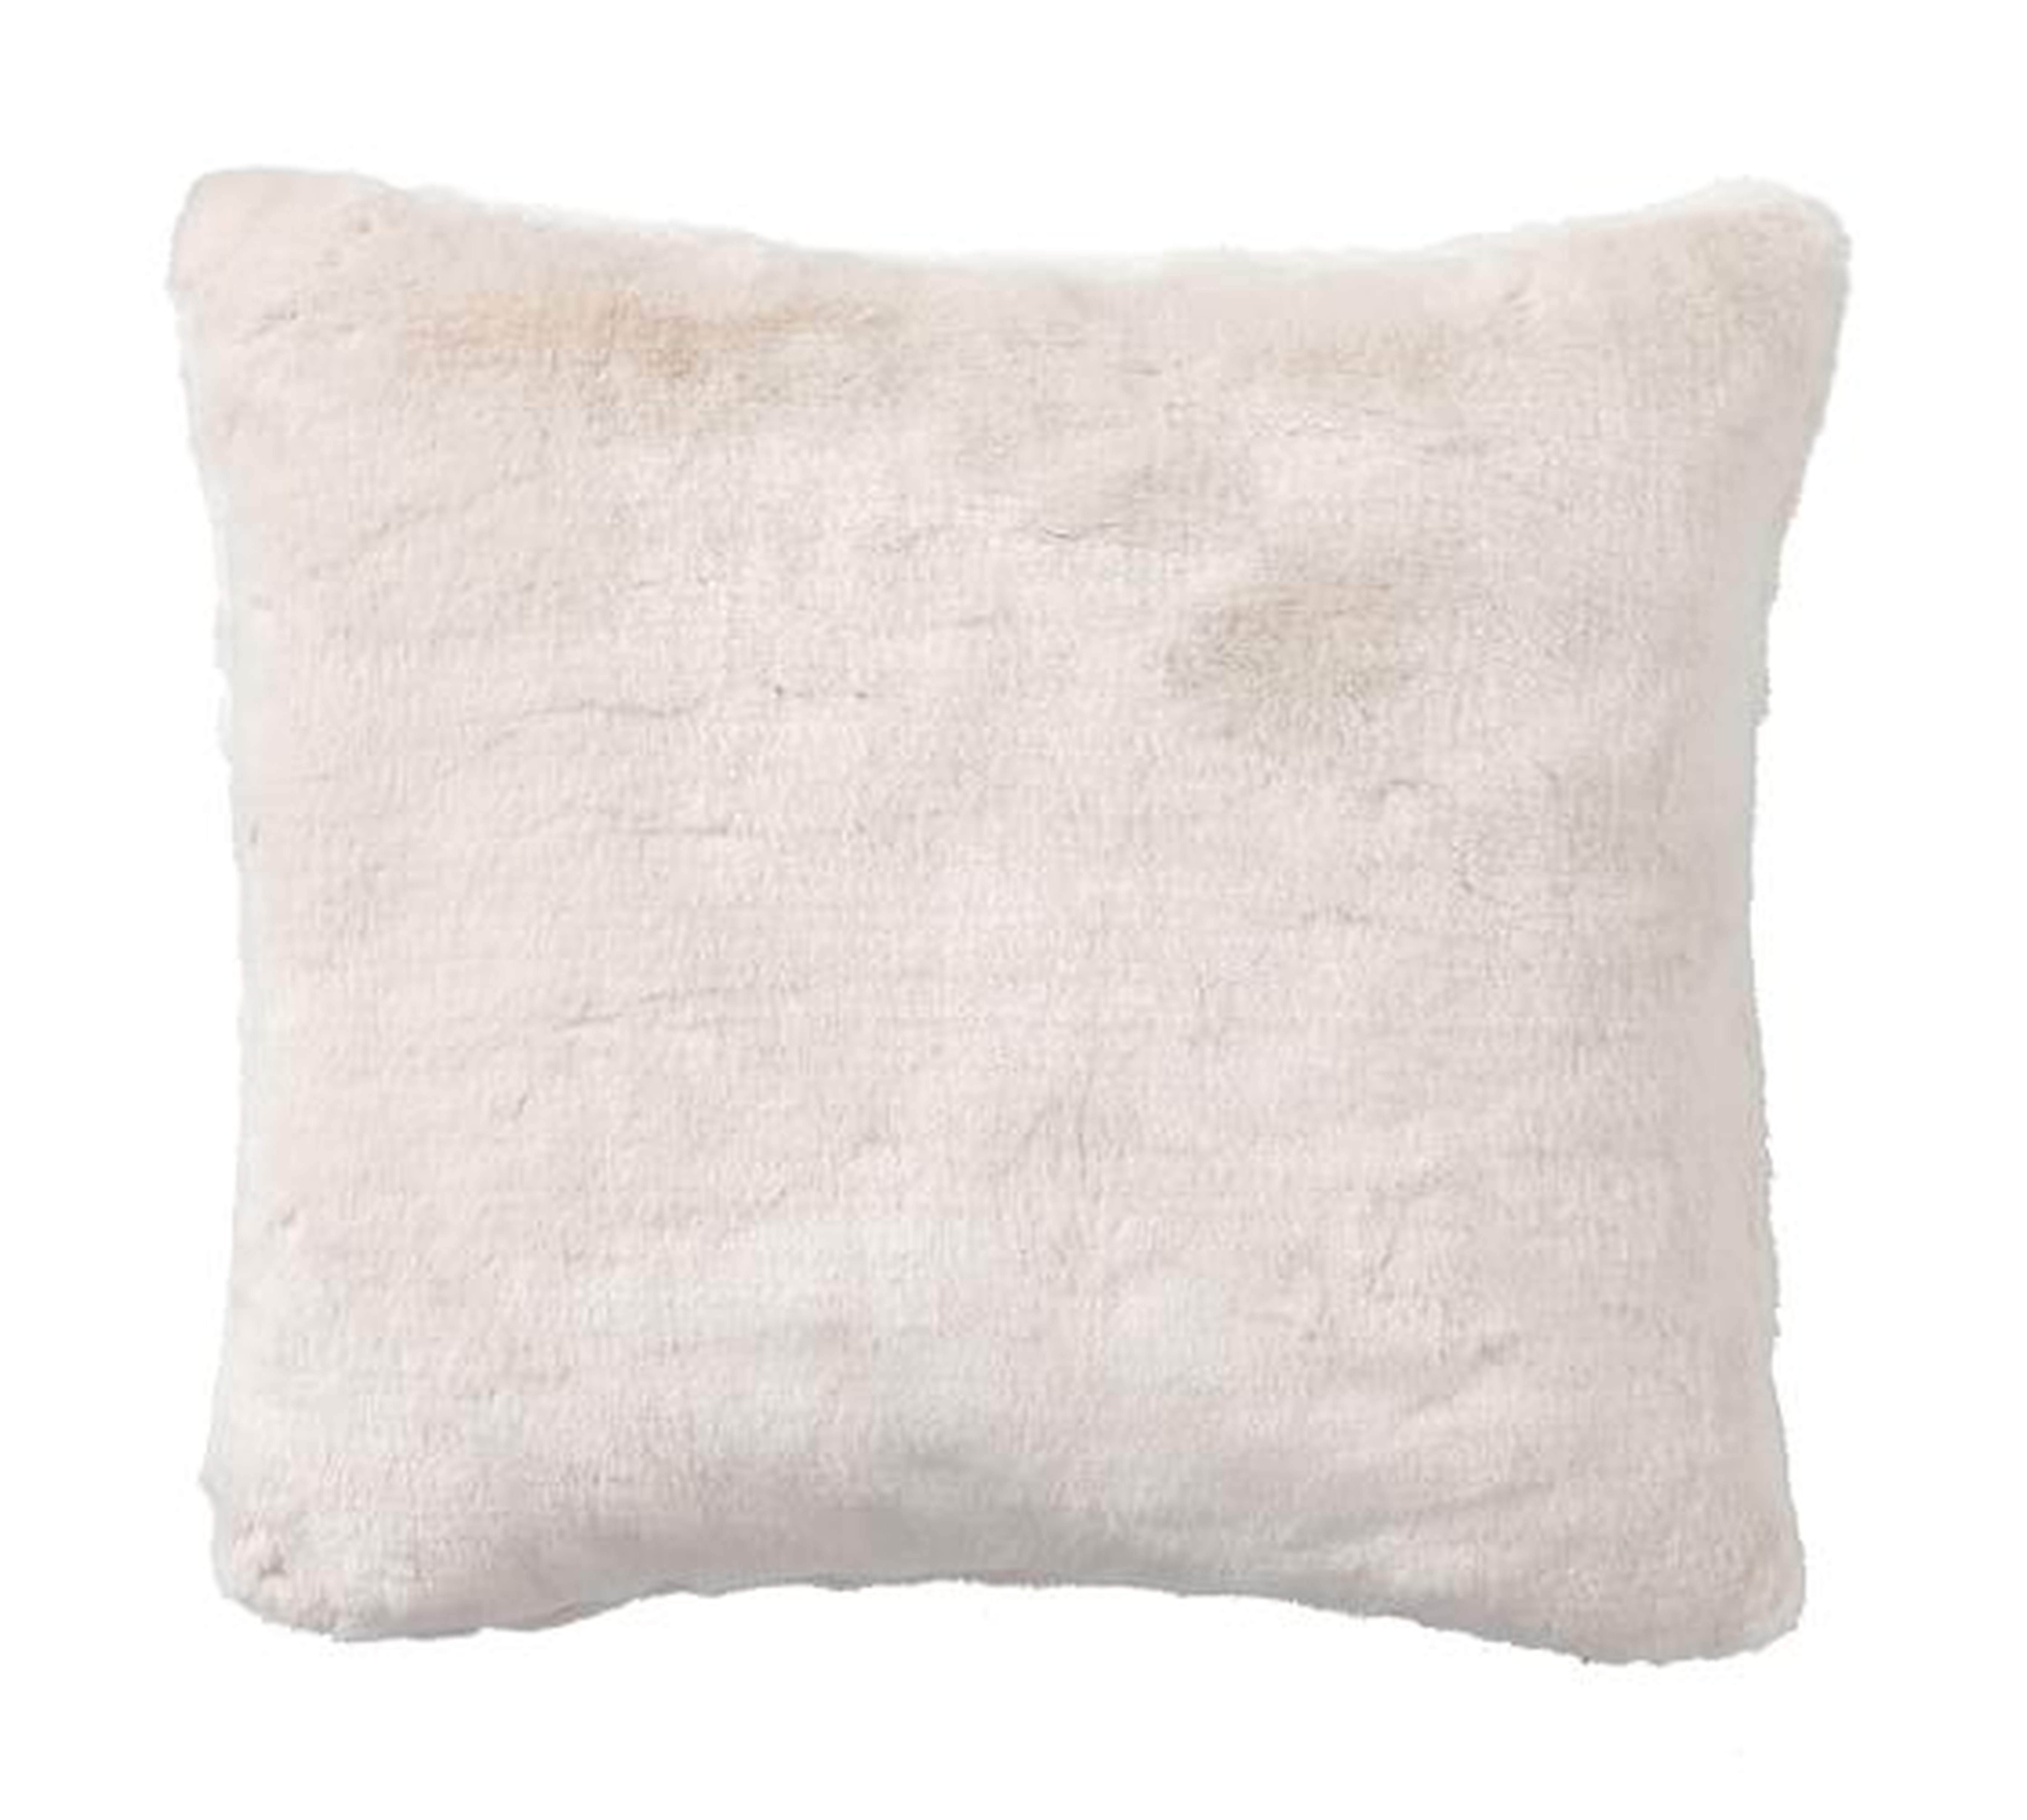 Alpaca Faux Fur Pillow Cover - 18x18 Insert sold separately - Pottery Barn